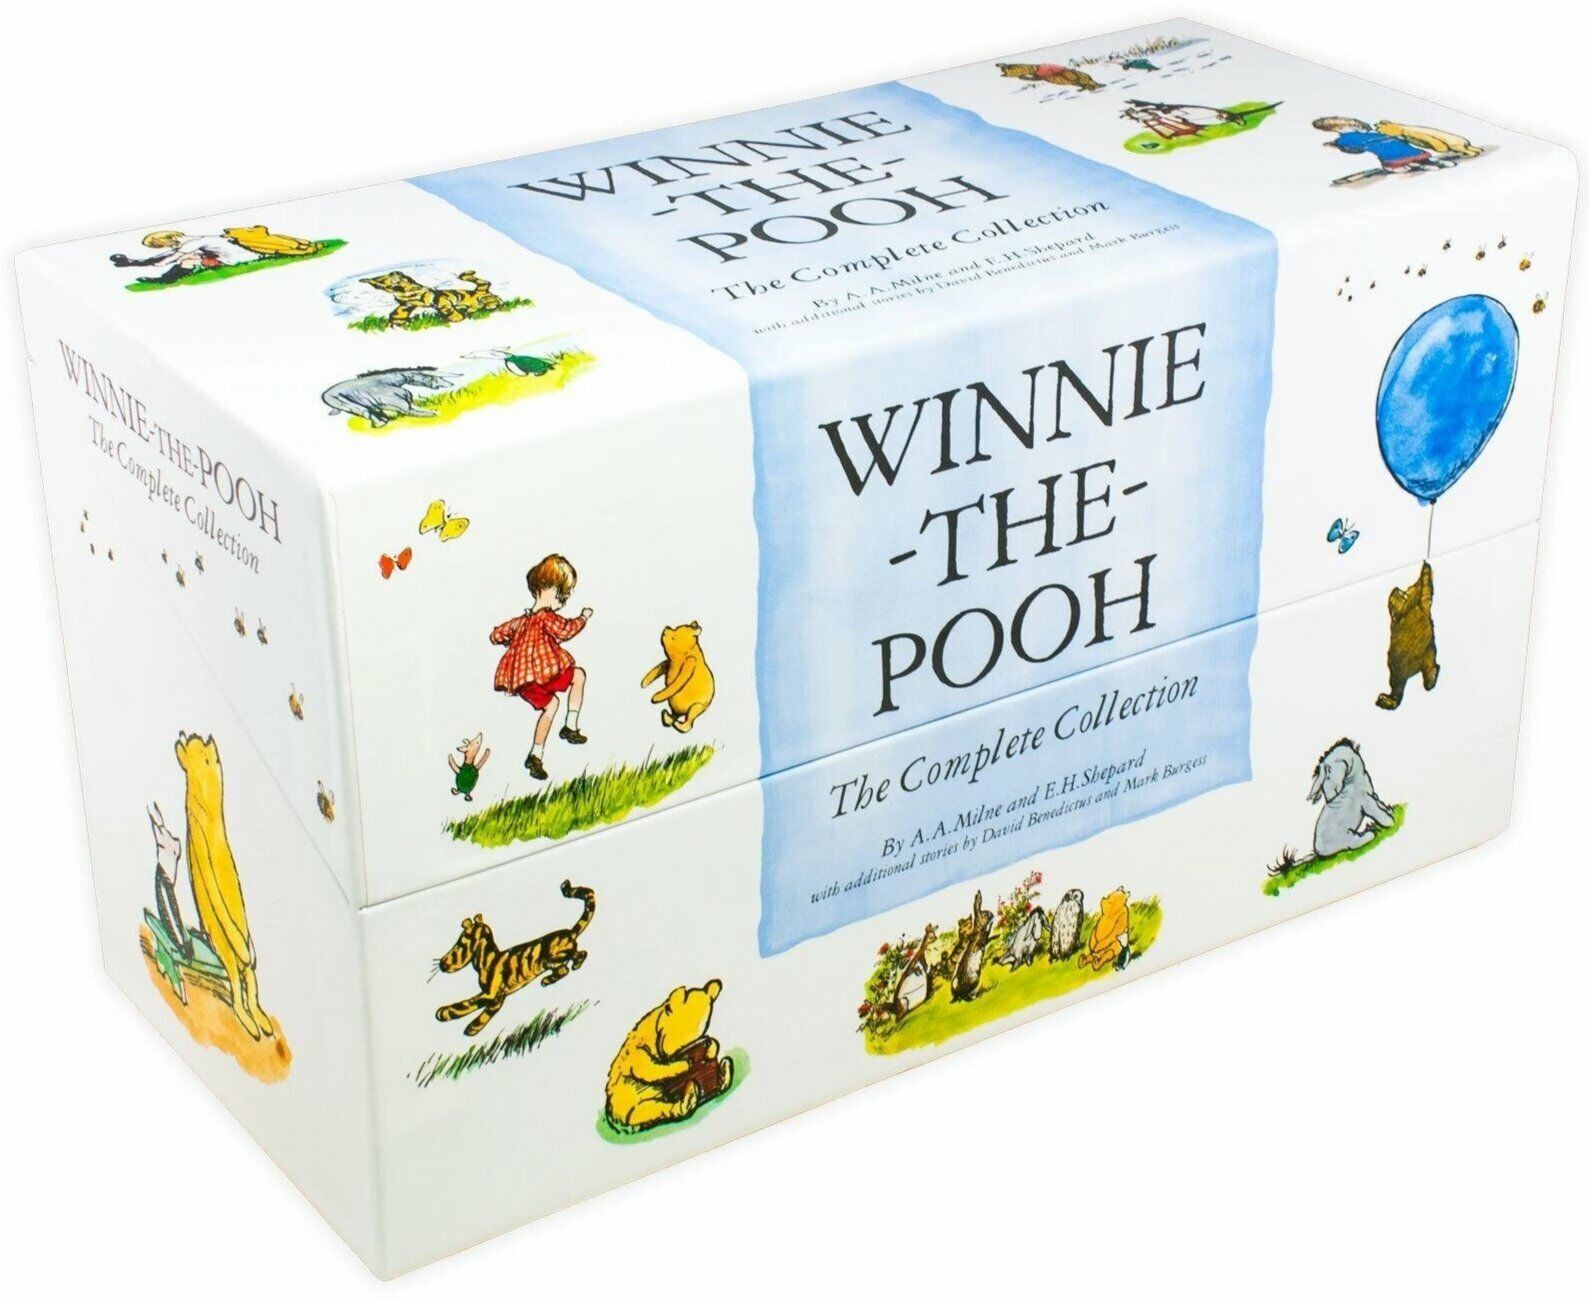 Winnie the Pooh 30 copy Complete Collection